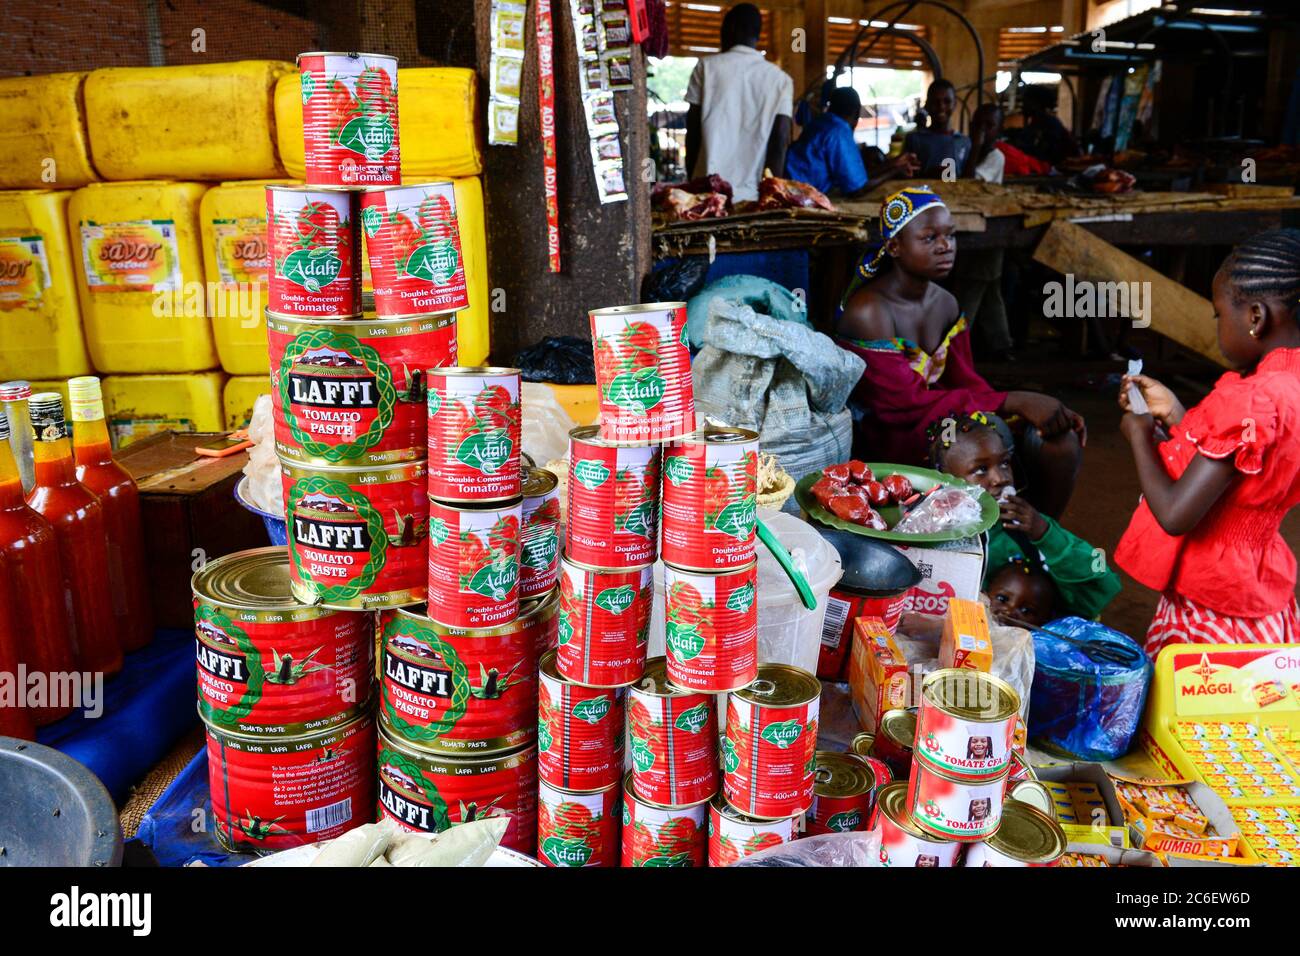 https://c8.alamy.com/comp/2C6EW6D/burkina-faso-bobo-dioulasso-grande-marche-sale-of-spices-vegetable-oil-maggi-cubes-of-nestle-swiss-company-and-canned-tomato-paste-brand-laffi-of-chinese-company-yuyao-yijia-food-technology-co-2C6EW6D.jpg